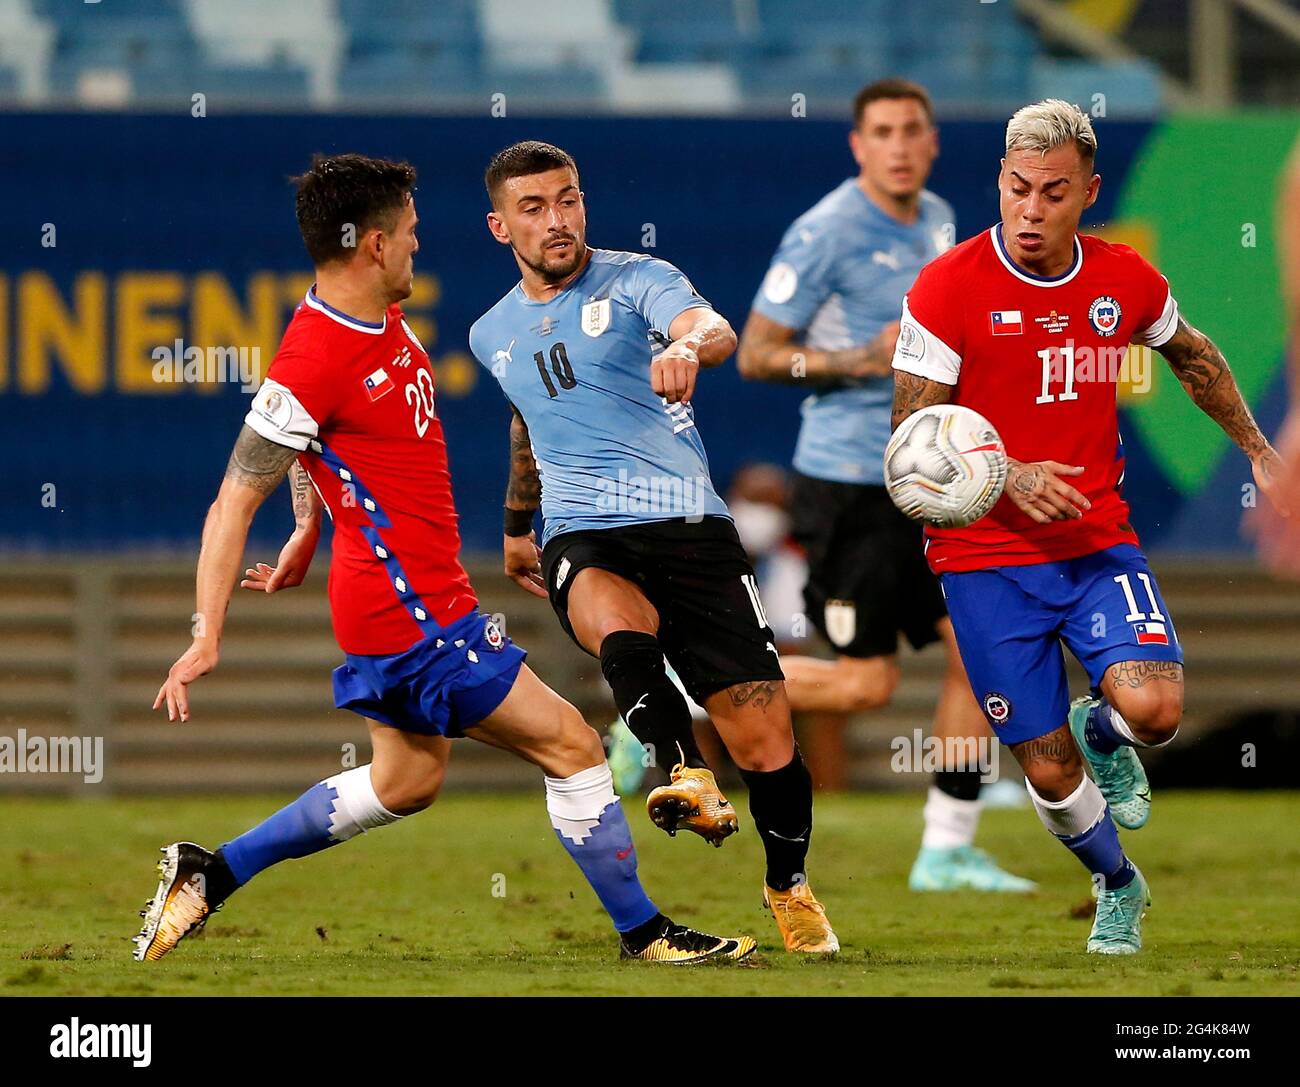 CUIABA, BRAZIL - JUNE 21: Giorgian De Arrascaeta of Uruguay competes for the ball with Charles Aranguiz and Eduardo Vargas of Chile ,during the match between Uruguay and Chile as part of Conmebol Copa America Brazil 2021 at Arena Pantanal on June 21, 2021 in Cuiaba, Brazil. (MB Media) Stock Photo